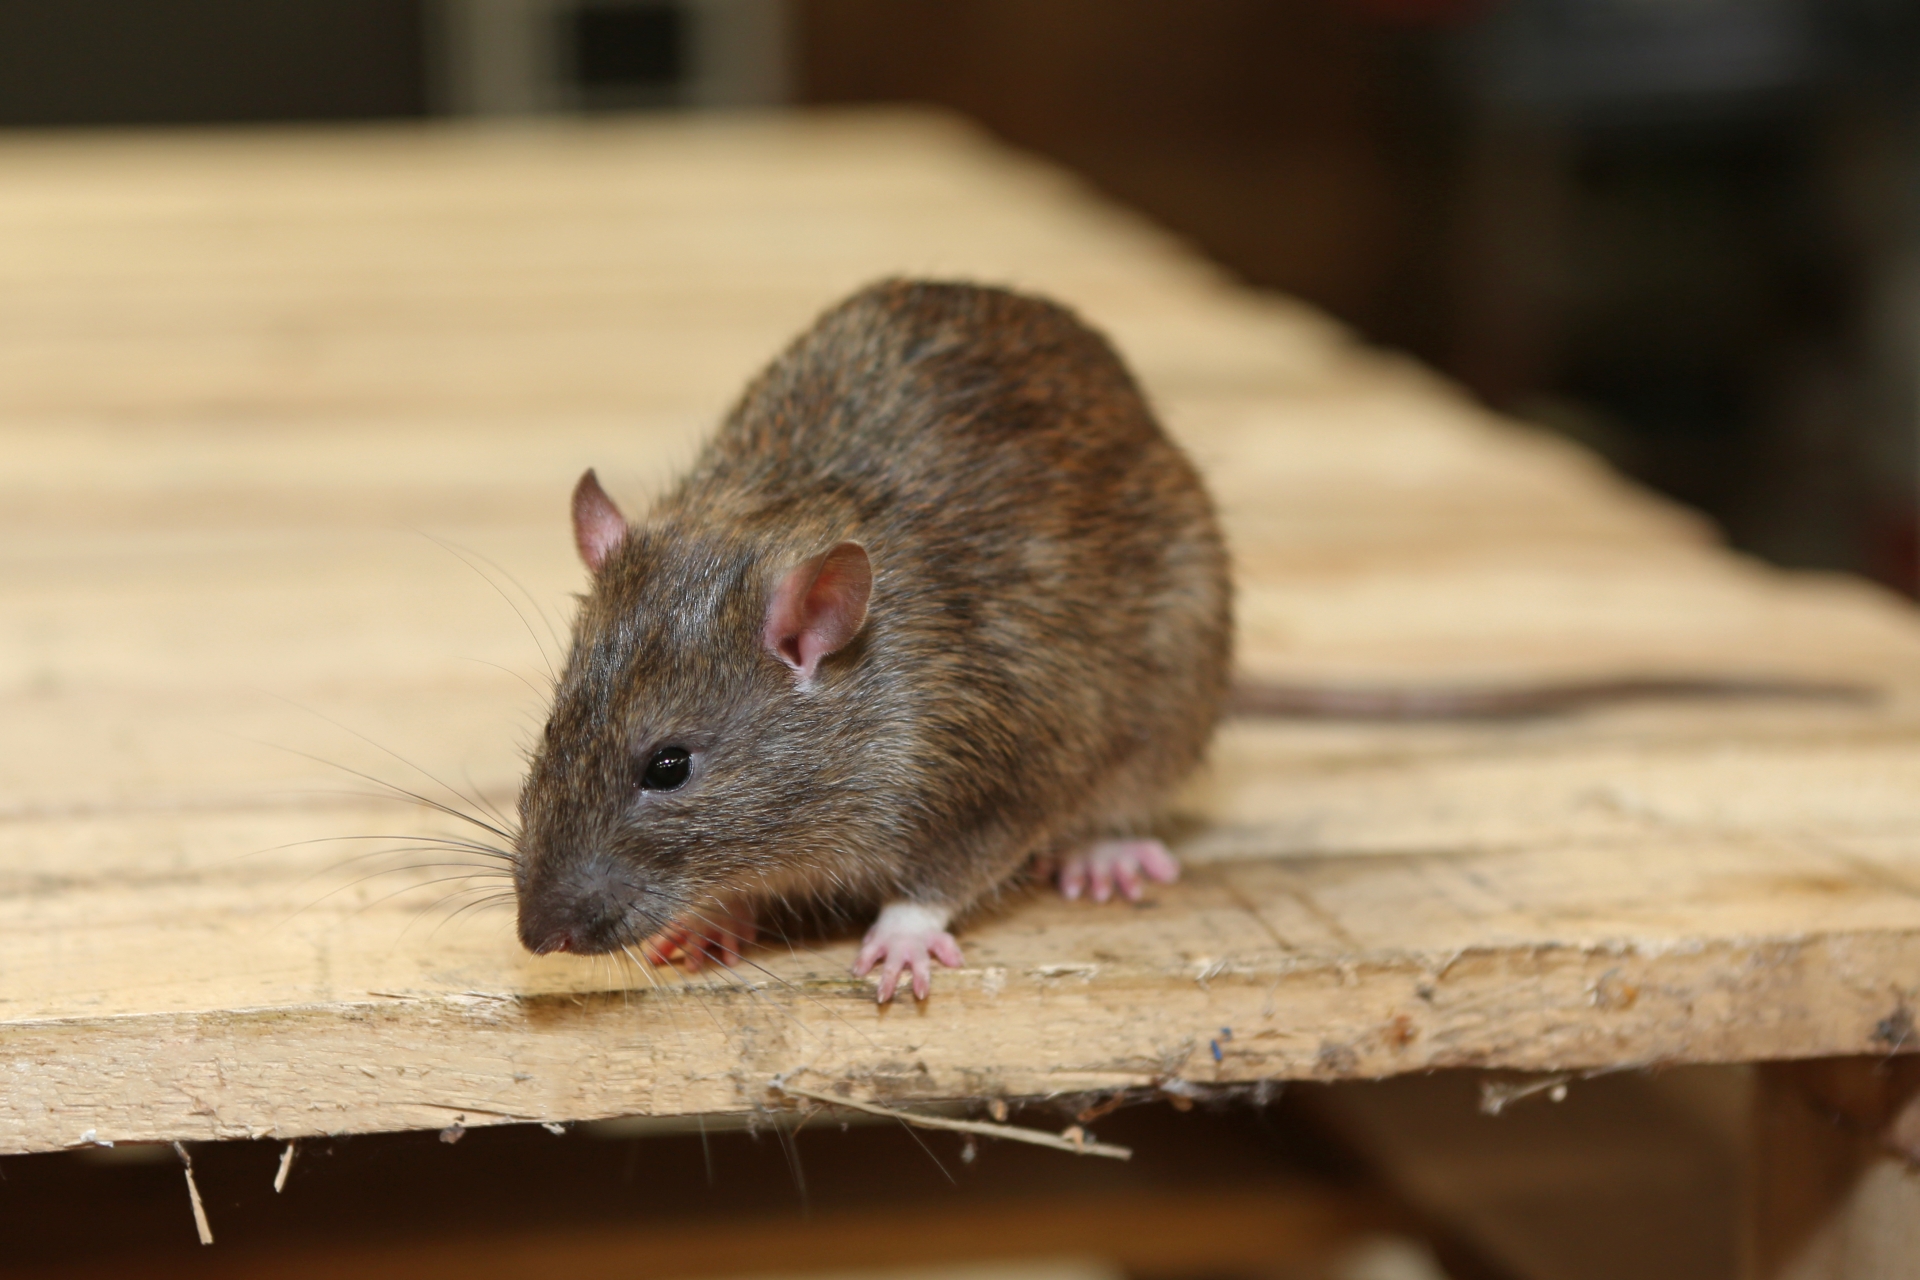 Rat Control, Pest Control in Brixton, SW2. Call Now 020 8166 9746